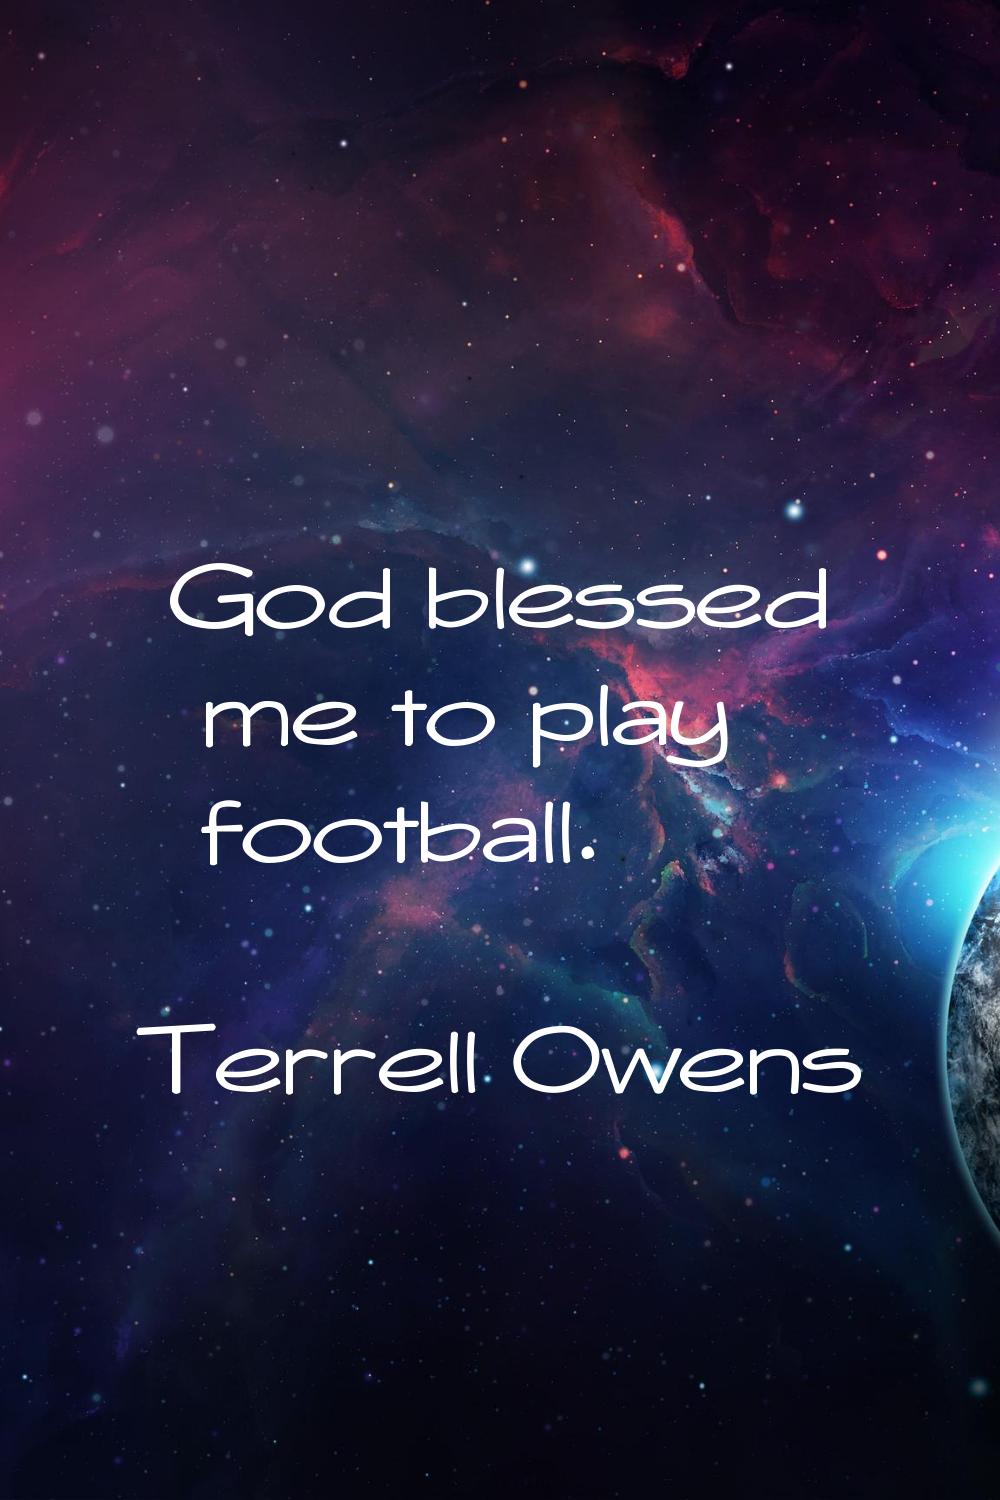 God blessed me to play football.